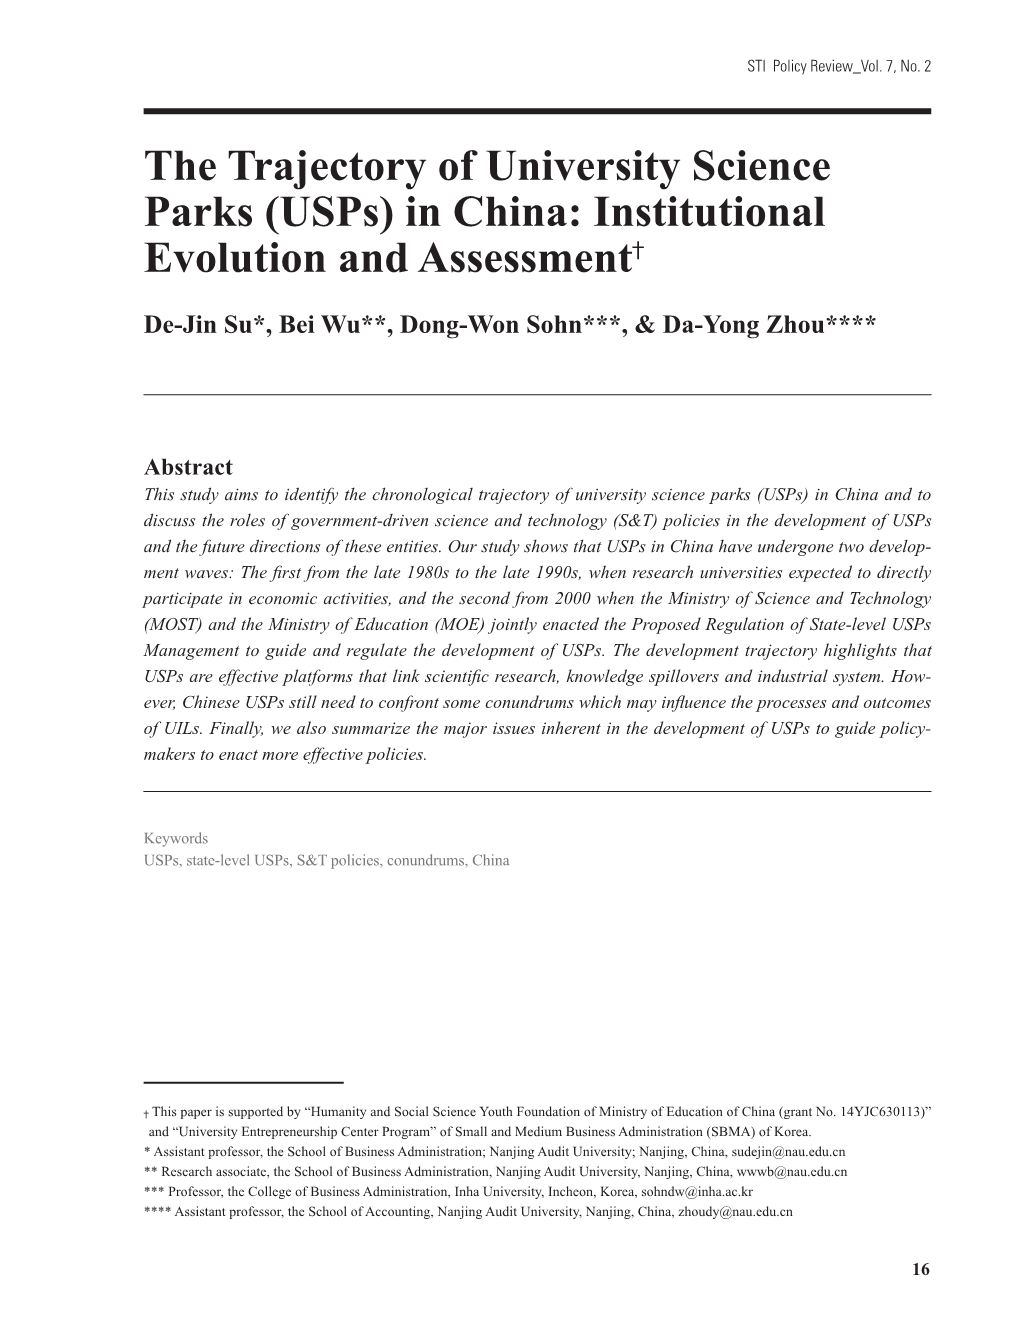 Usps) in China: Institutional Evolution and Assessment